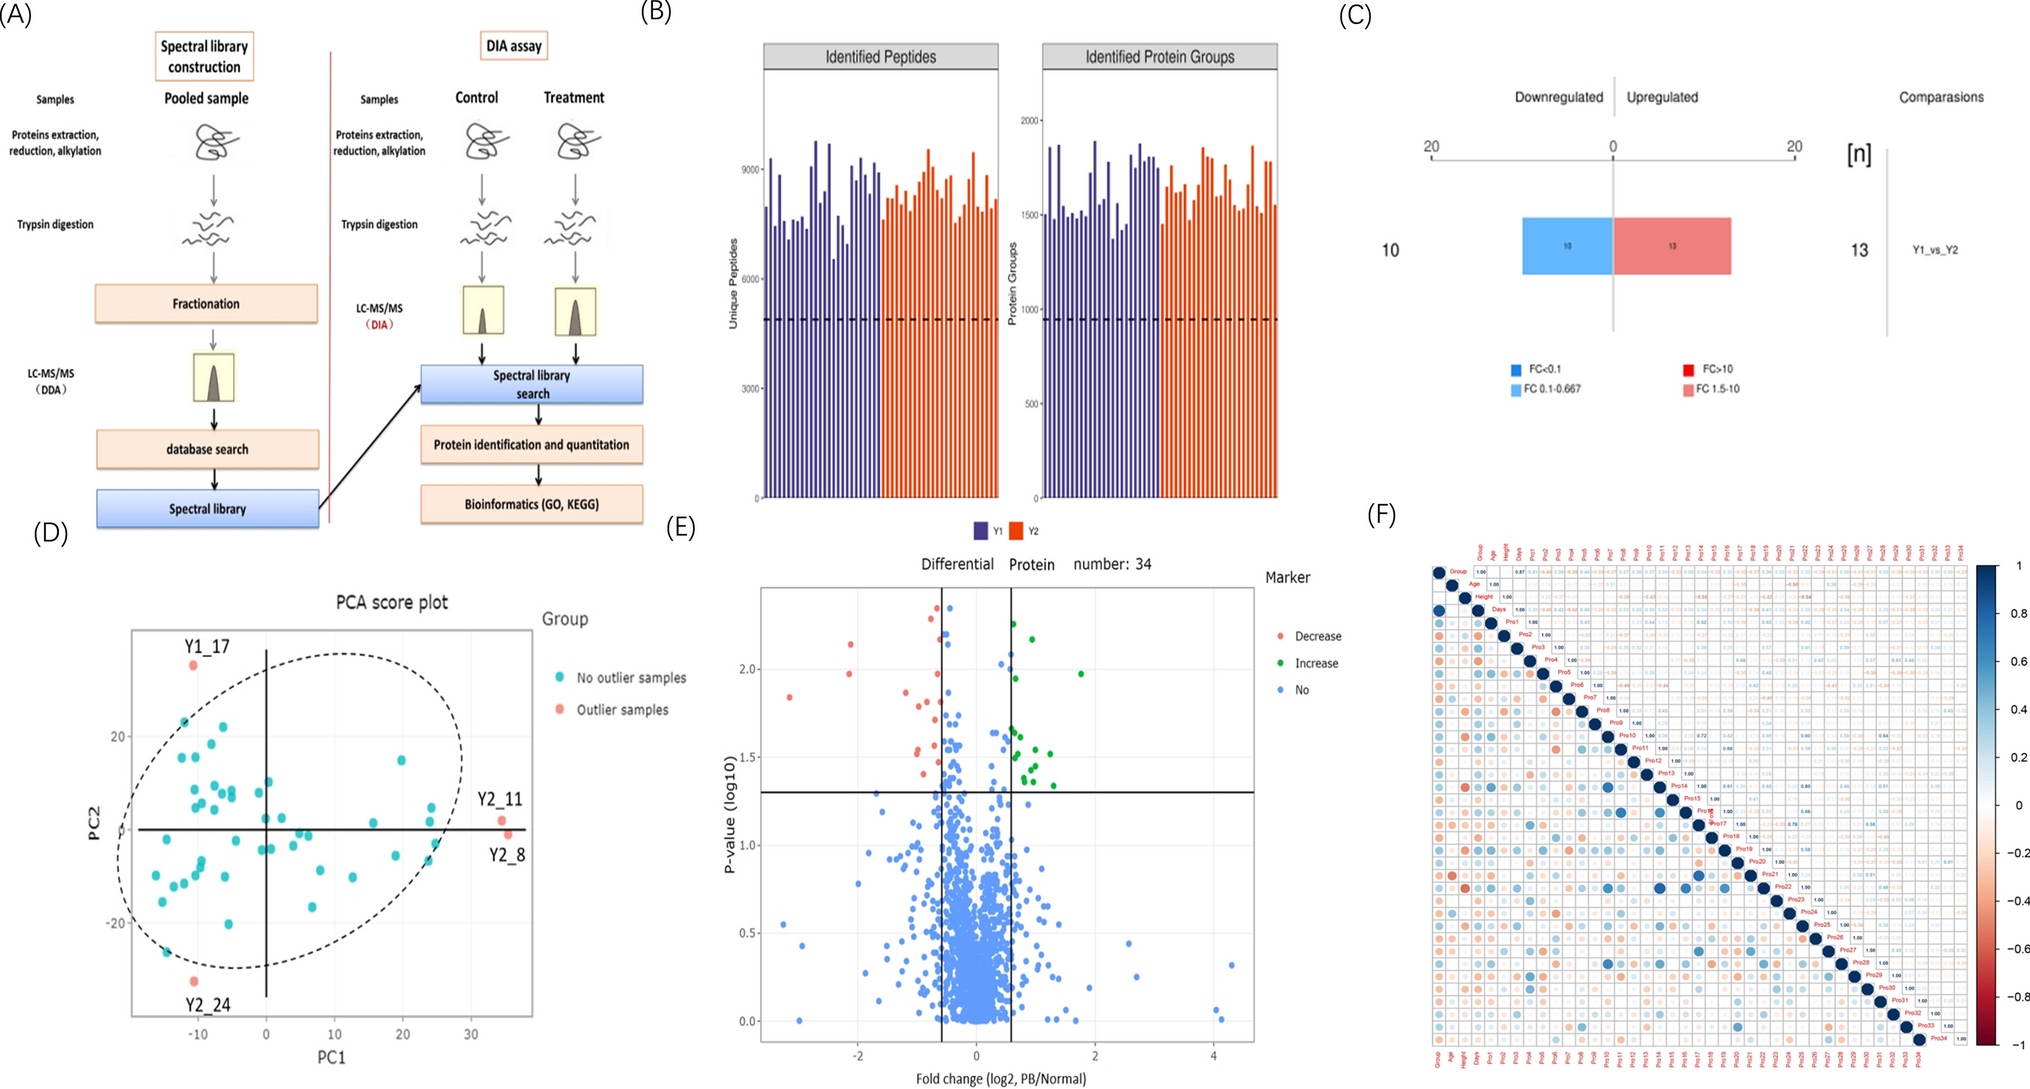 Amniotic Fluid Proteomics Analysis and In Vitro Validation to Identify Potential Biomarkers of Preterm Birth